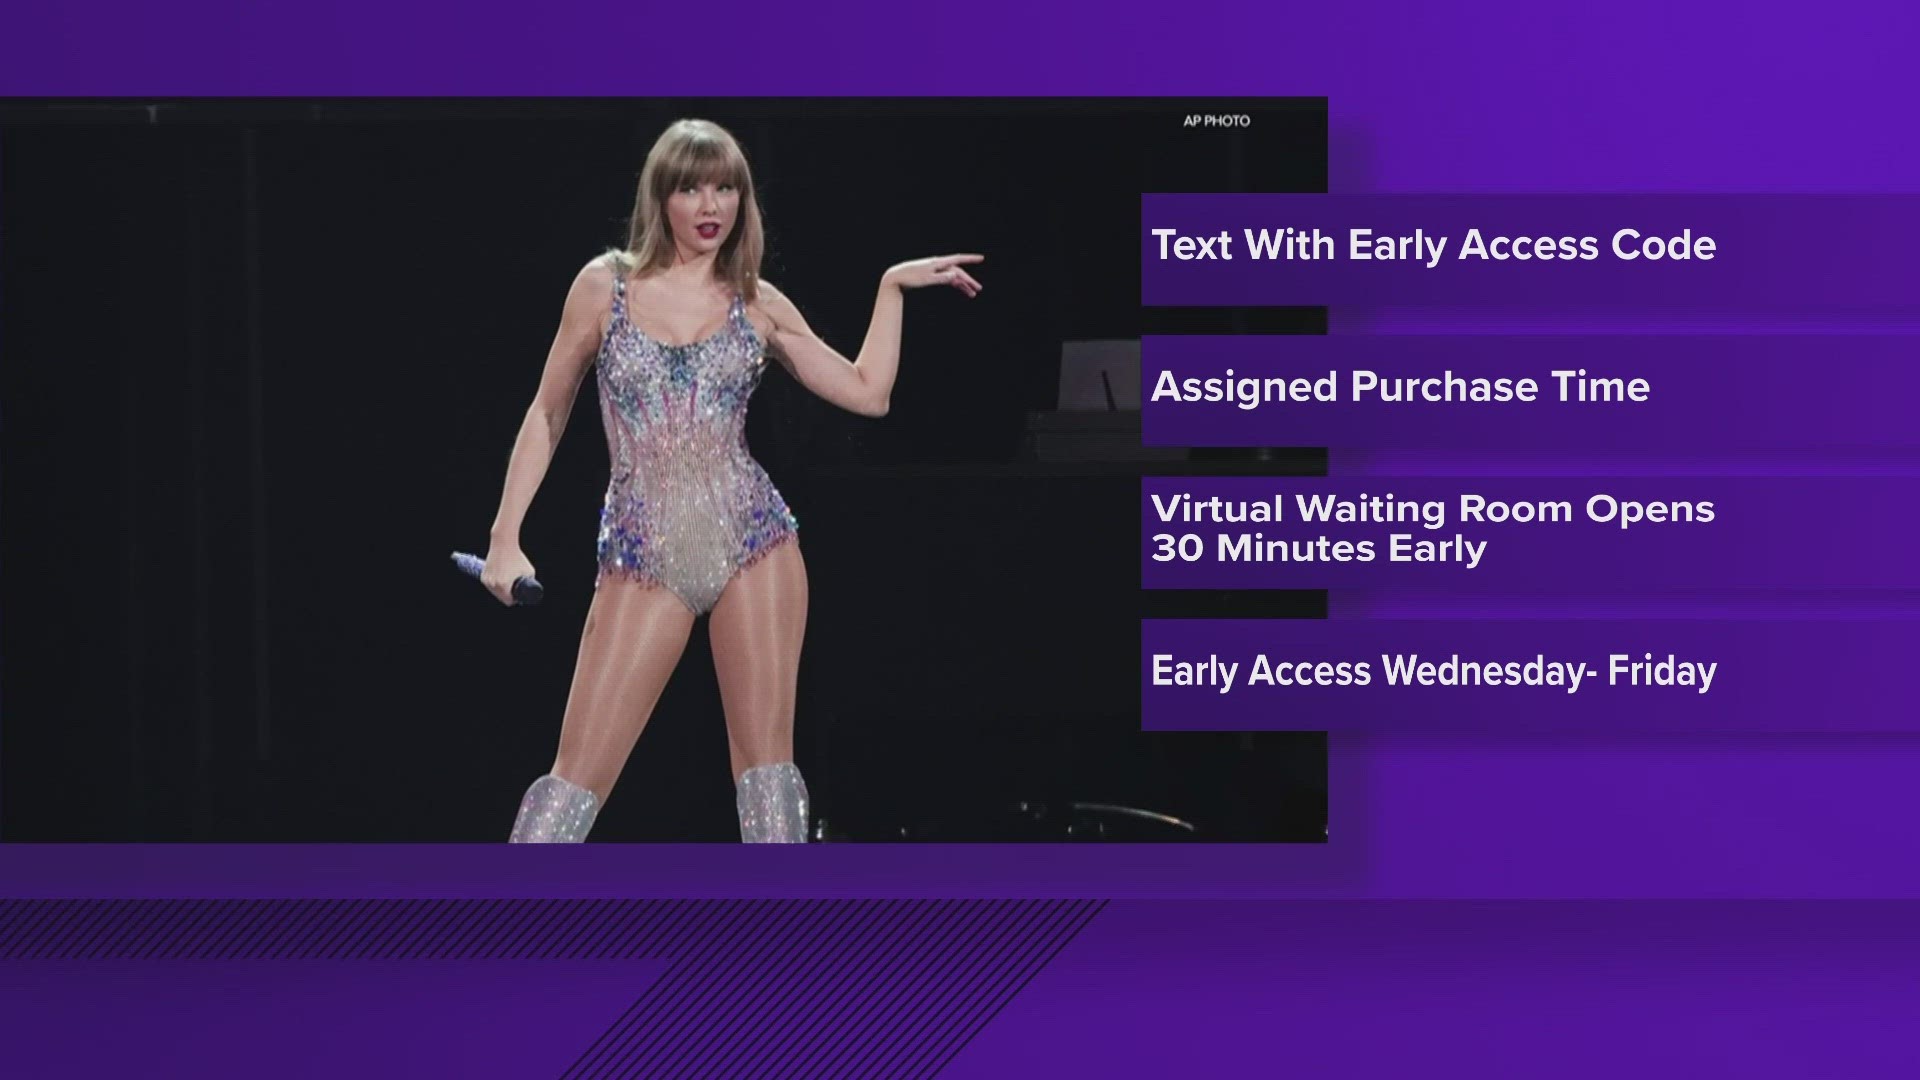 Our resident Swiftie Allison Gormly tells us What's the Deal with the Taylor Swift Ticketmaster pre-sale process.